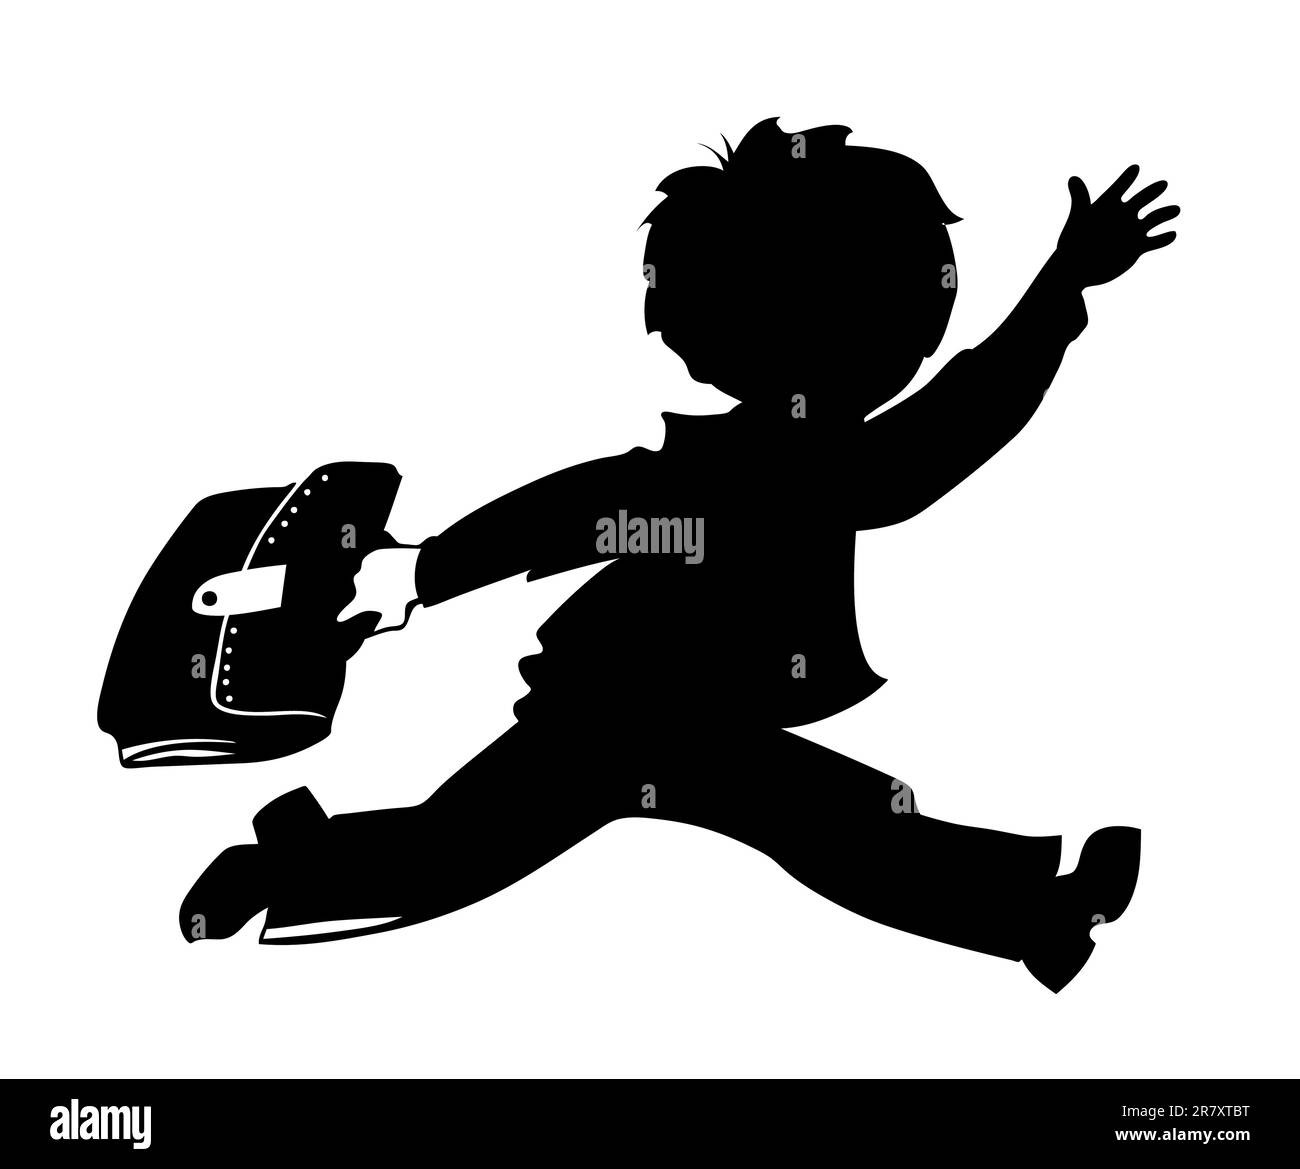 schoolboy silhouette on white background, vector illustration Stock Vector